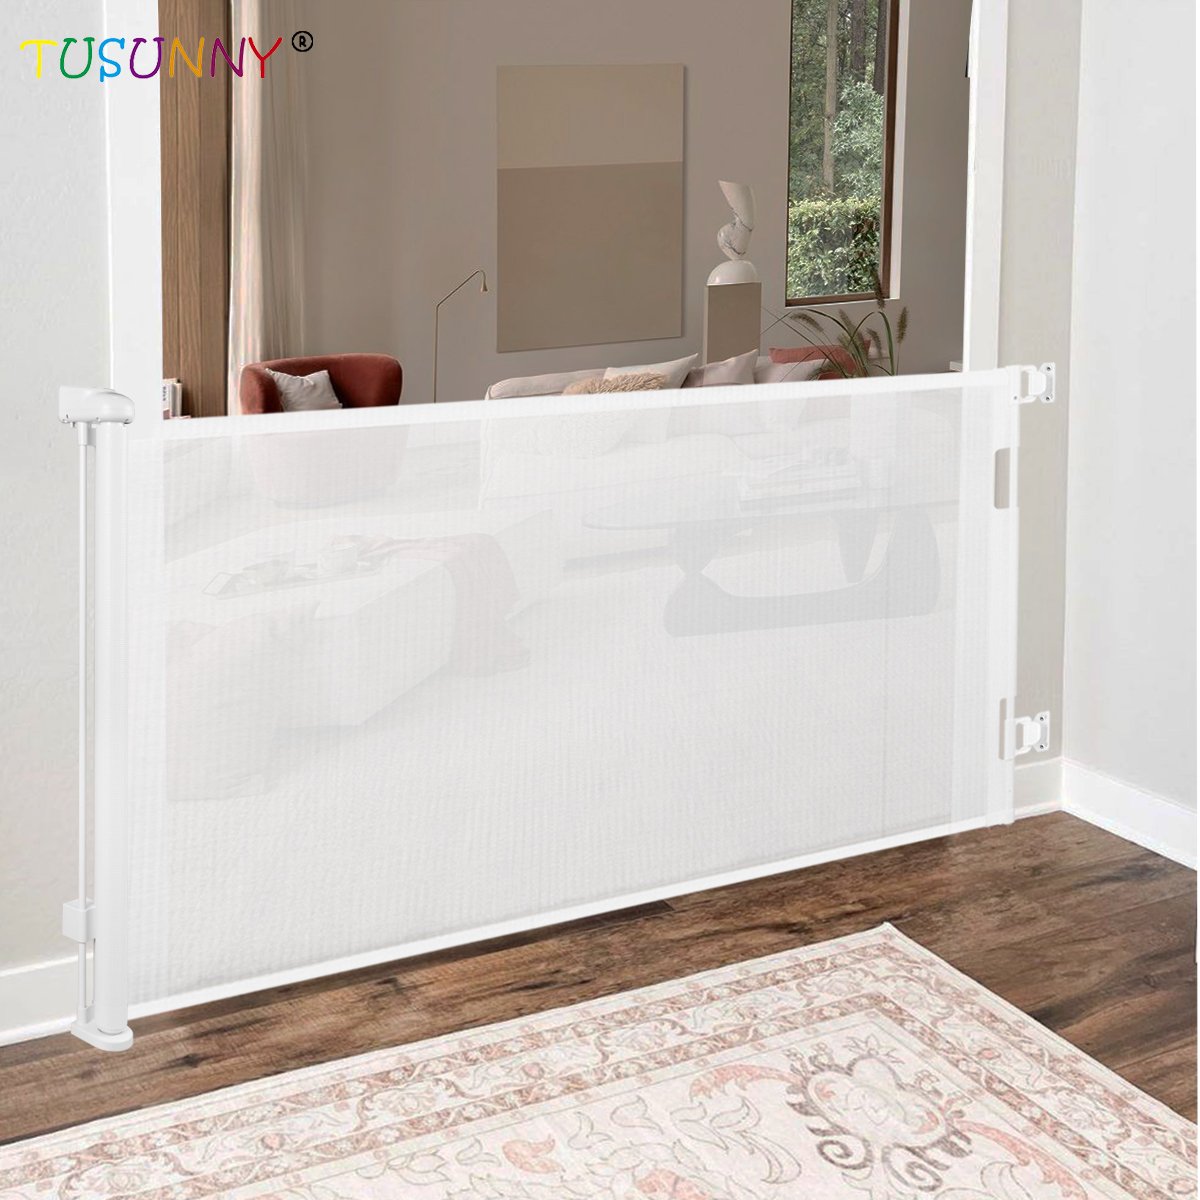 SH20.006B03 Retractable Baby Gate New Kids Safety Mesh Gate